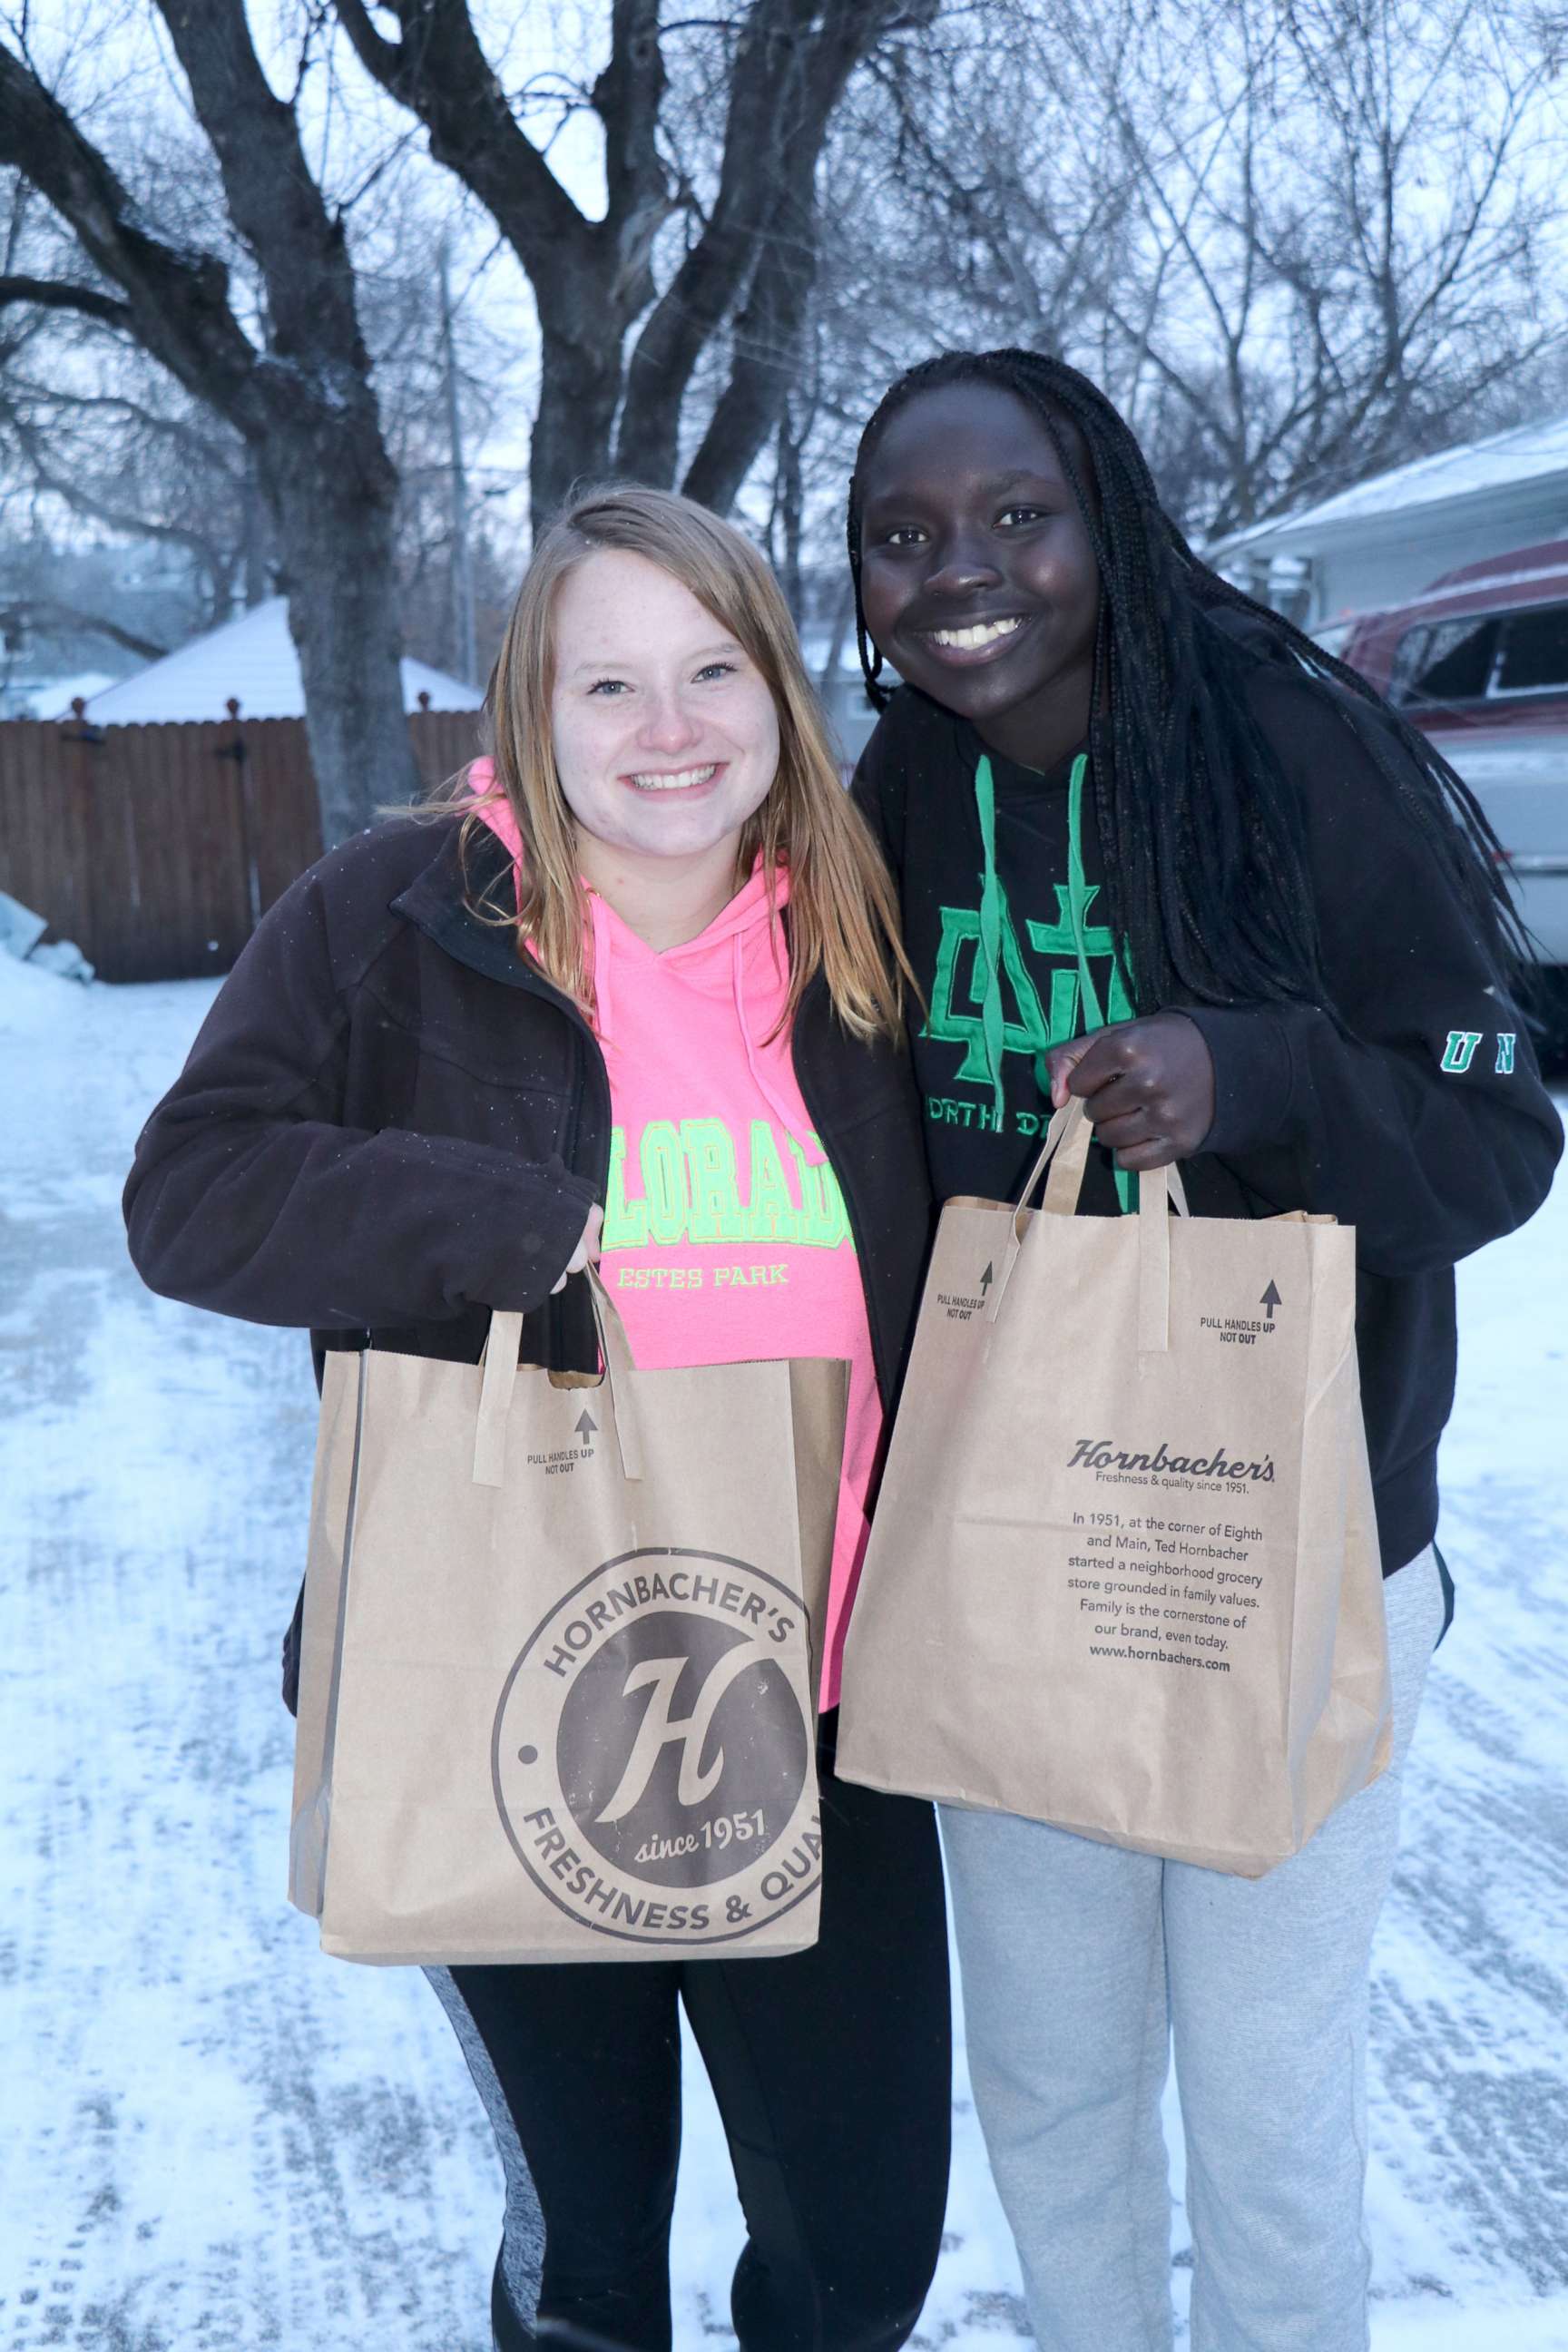 PHOTO: Students from Legacy Children's Foundation completing community service by making deliveries to hungry families that need help getting food on the table in undated photo.